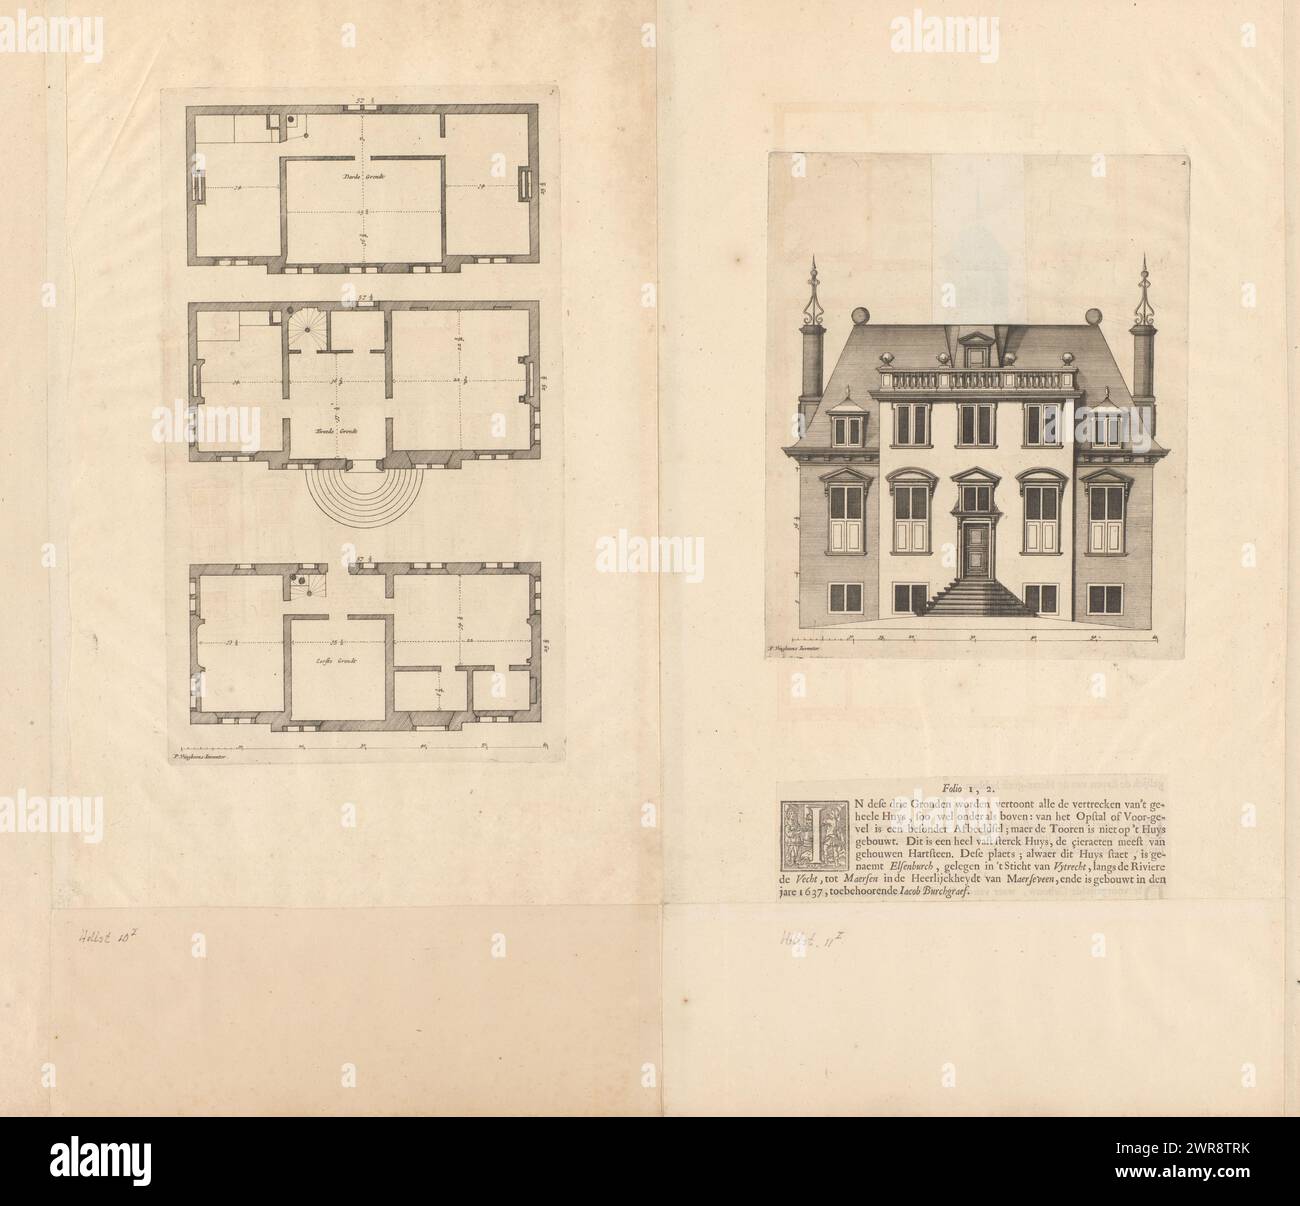 Floor plan and facade of the Elsenburg country house in Maarsseveen, Main designs by Philips Vinckboons (series title), Images of the main buildings from all that Philips Vingboons has organized (series title), Floor plan of three floors and facade of the Elsenburg country estate in Maarsseveen, built in 1637. Numbered 1 and 2 at the top right. A caption for the images is pasted under the print with the facade., print maker: Johannes Vinckboons, after design by: Philips Vinckboons (II), Amsterdam, 1648, paper, etching, letterpress printing, snipping Stock Photo